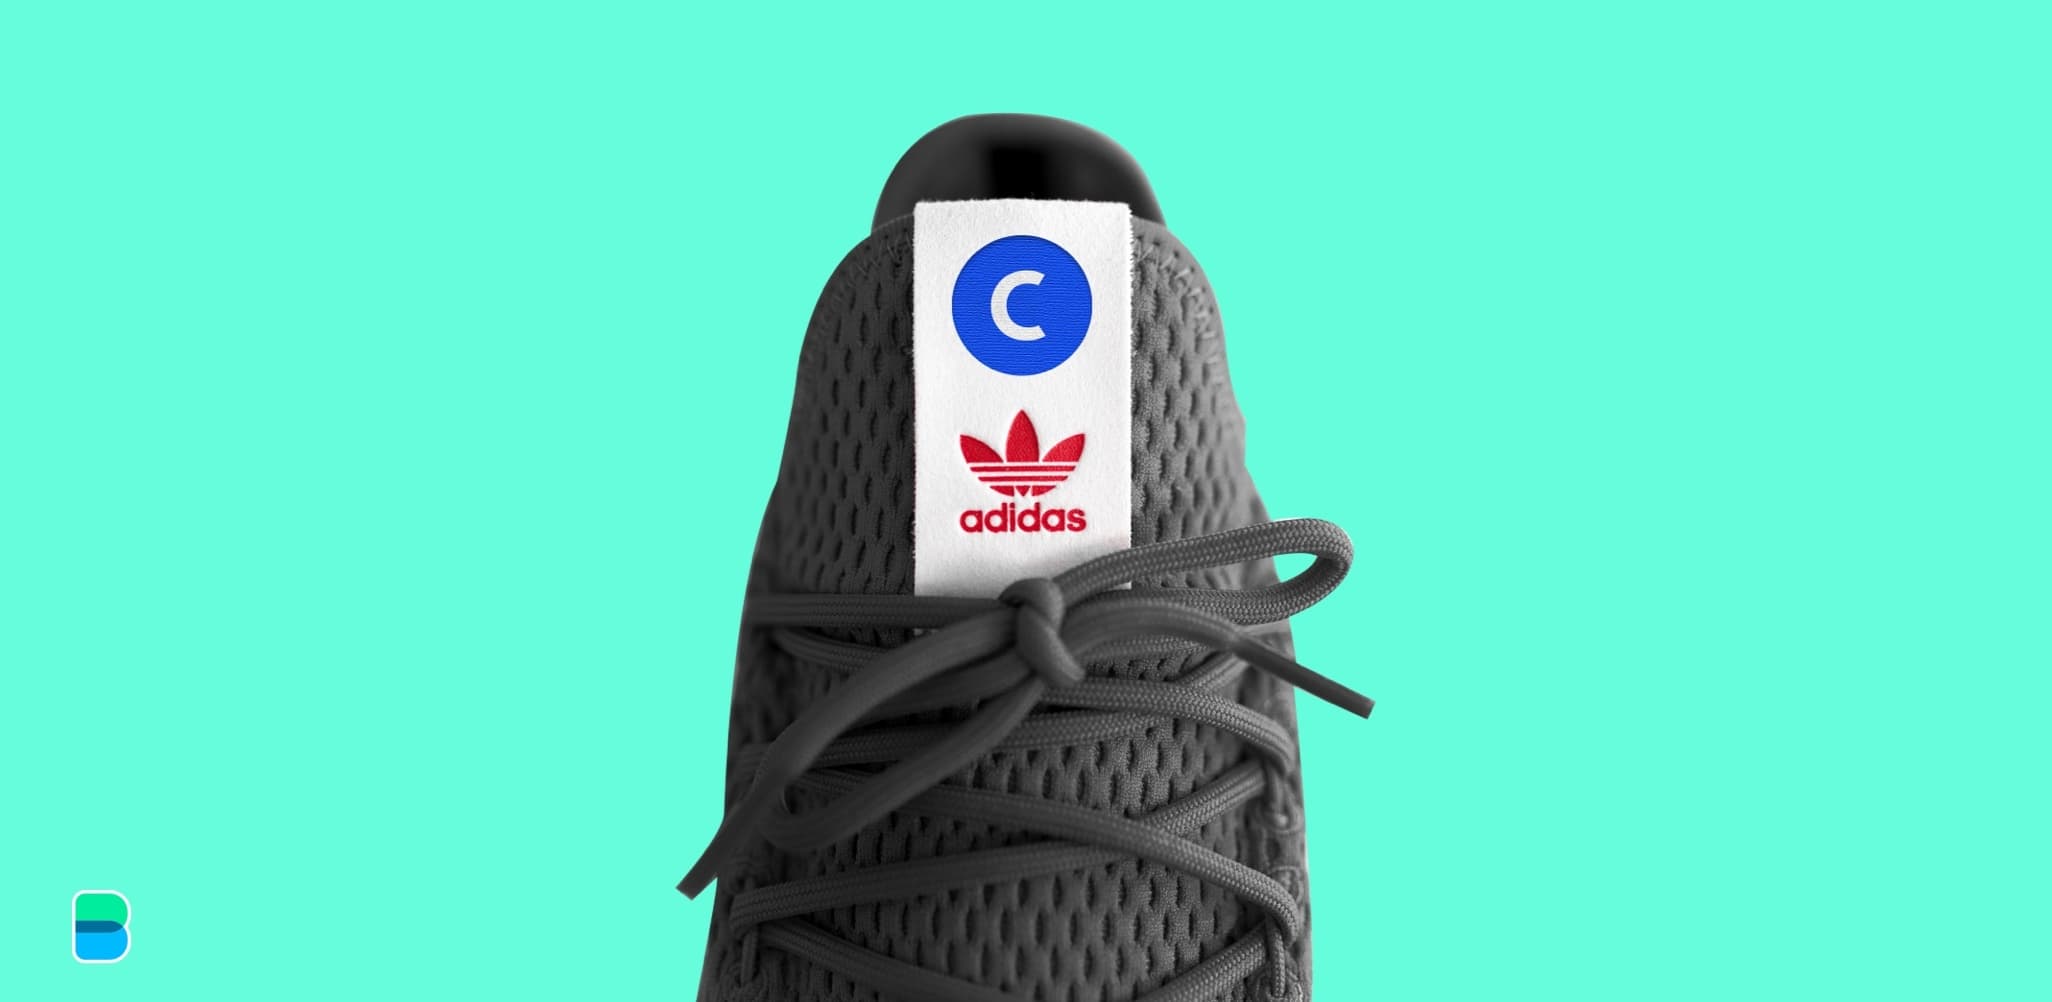 What are Adidas and Coinbase up to?